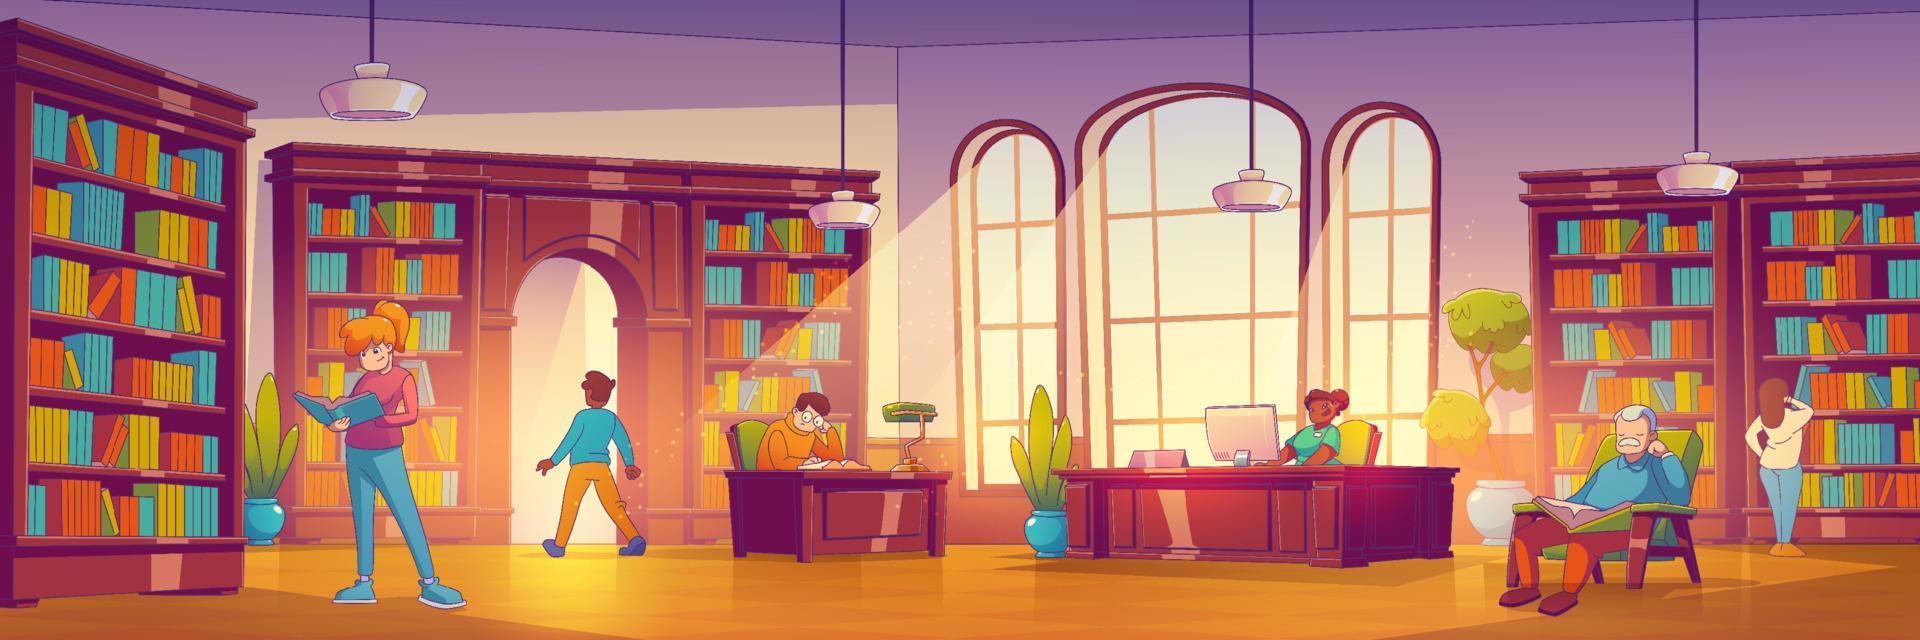 School library or store with books and people vector